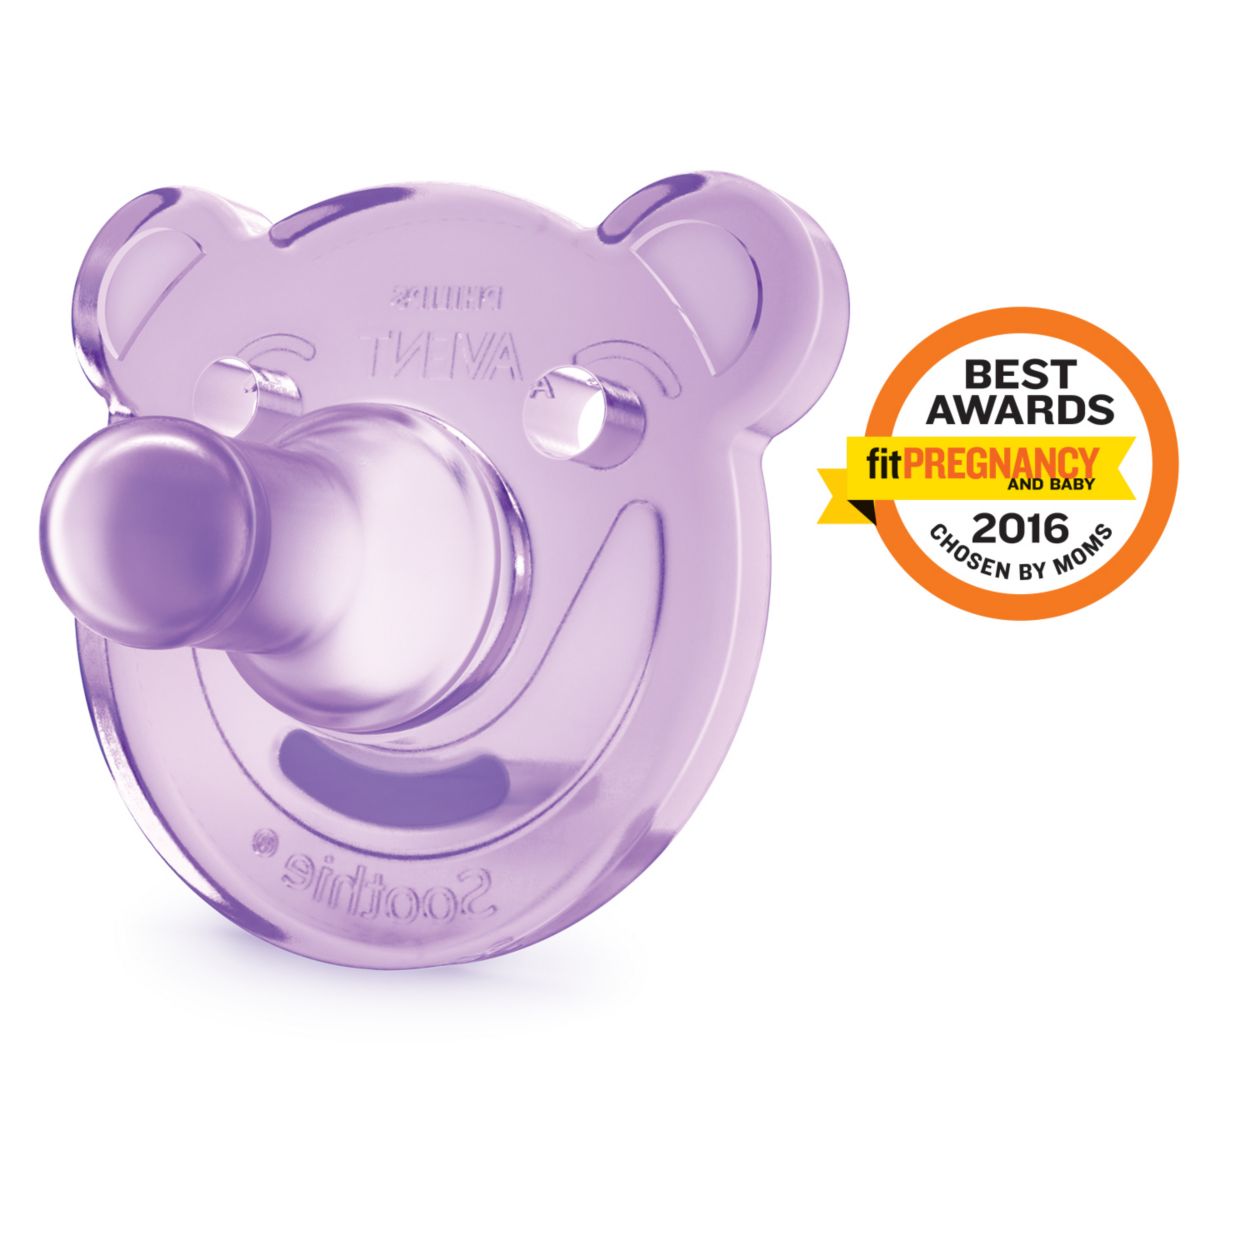  Personalized Pacifiers, Binkys, and Soothies!